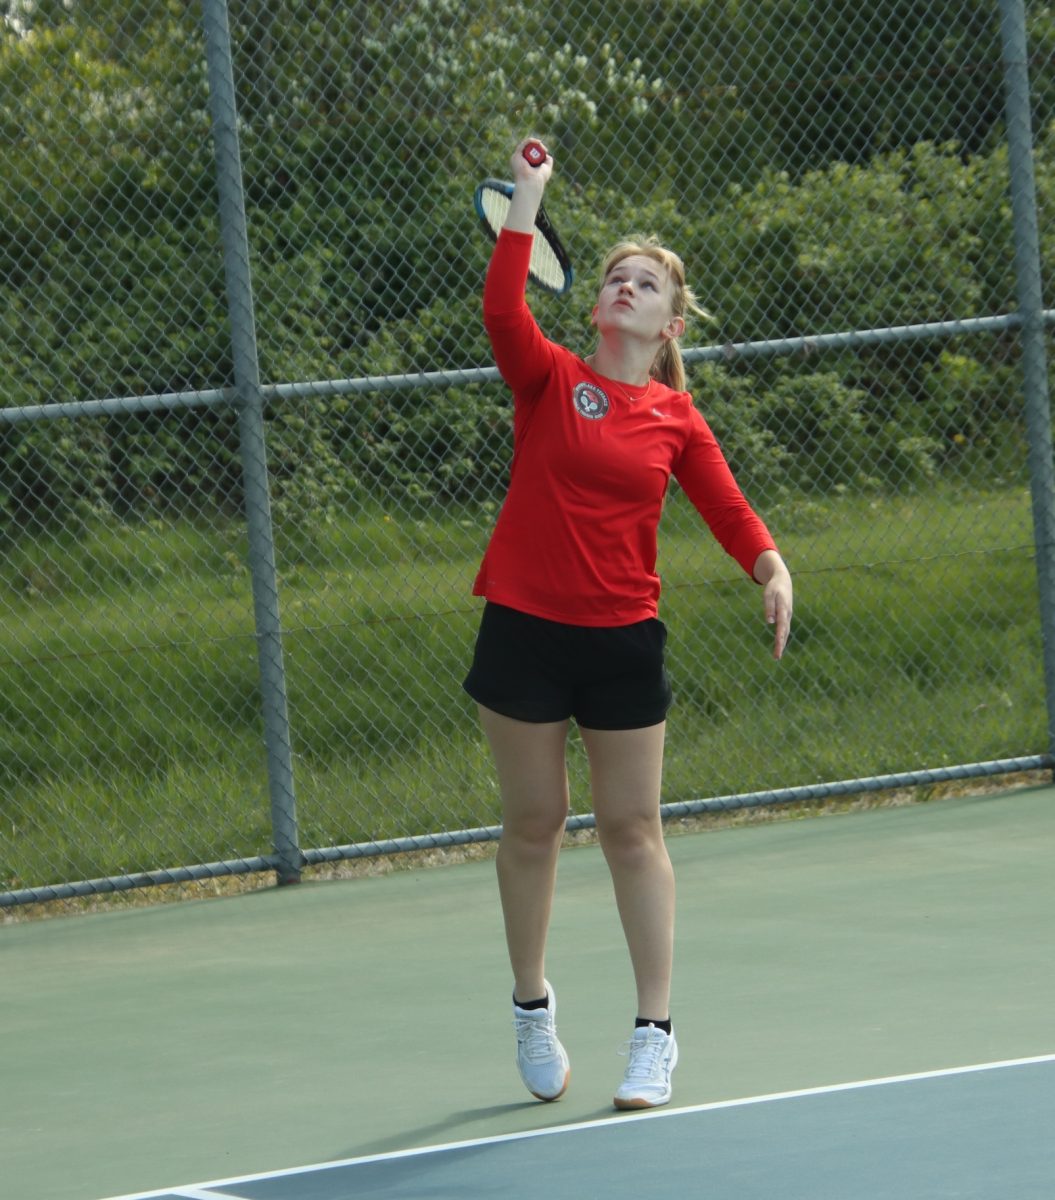 Senior Angela Grachev keeping an eye on the ball as she goes to serve during a tennis match.